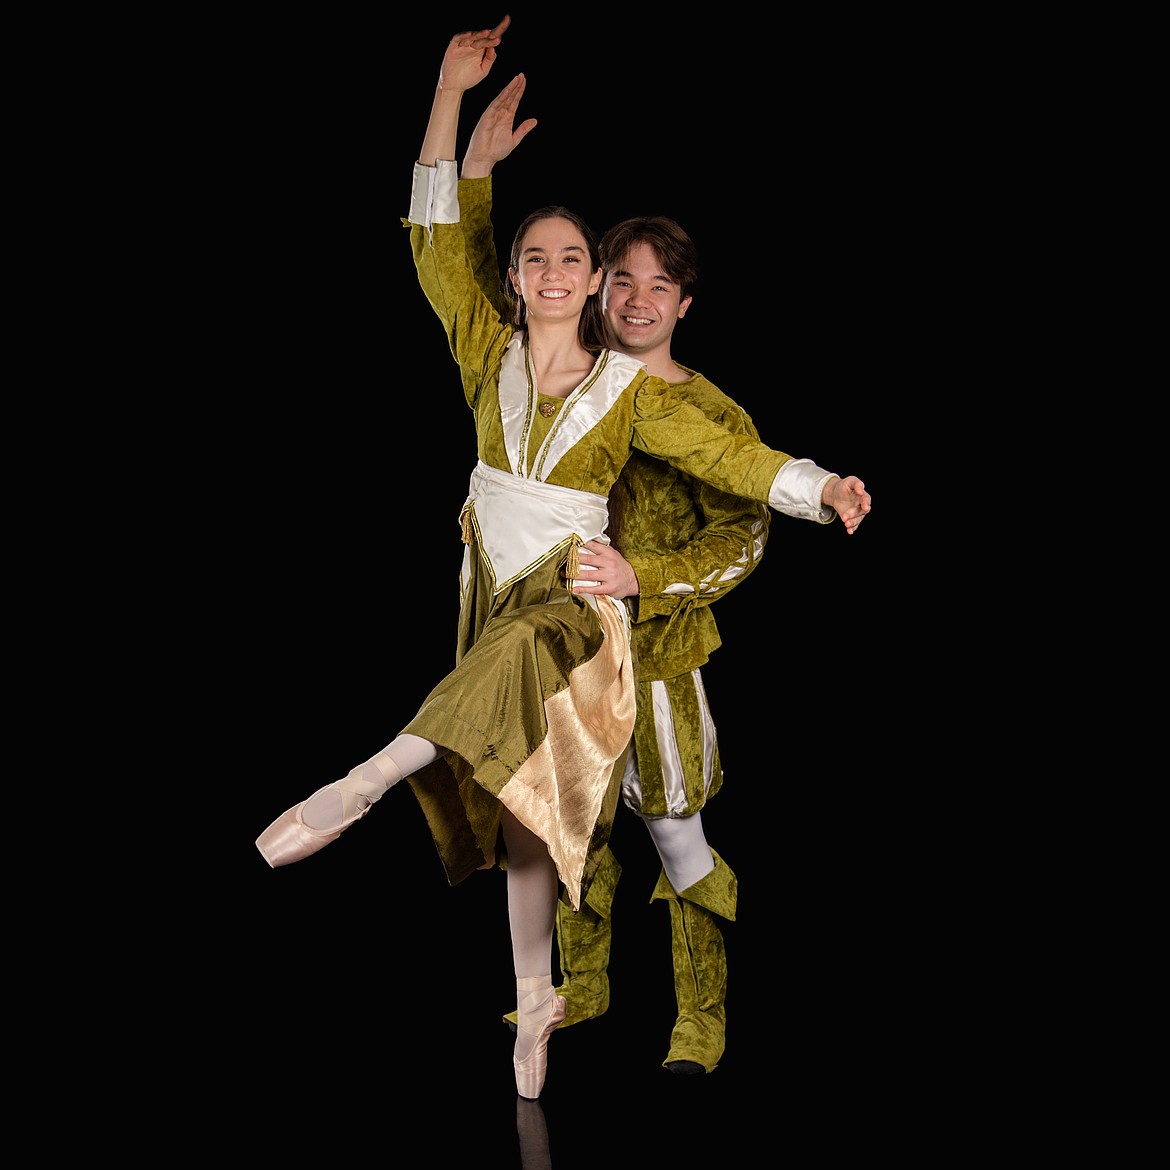 Northwest Ballet Company soloist Miki Flint as Helena and guest dancer Sean Hegstad as Demetrius in the spring production of Shakespeare's "A Midsummer Night's Dream" scheduled for May 13 and 14. (Photo by Picture Montana)